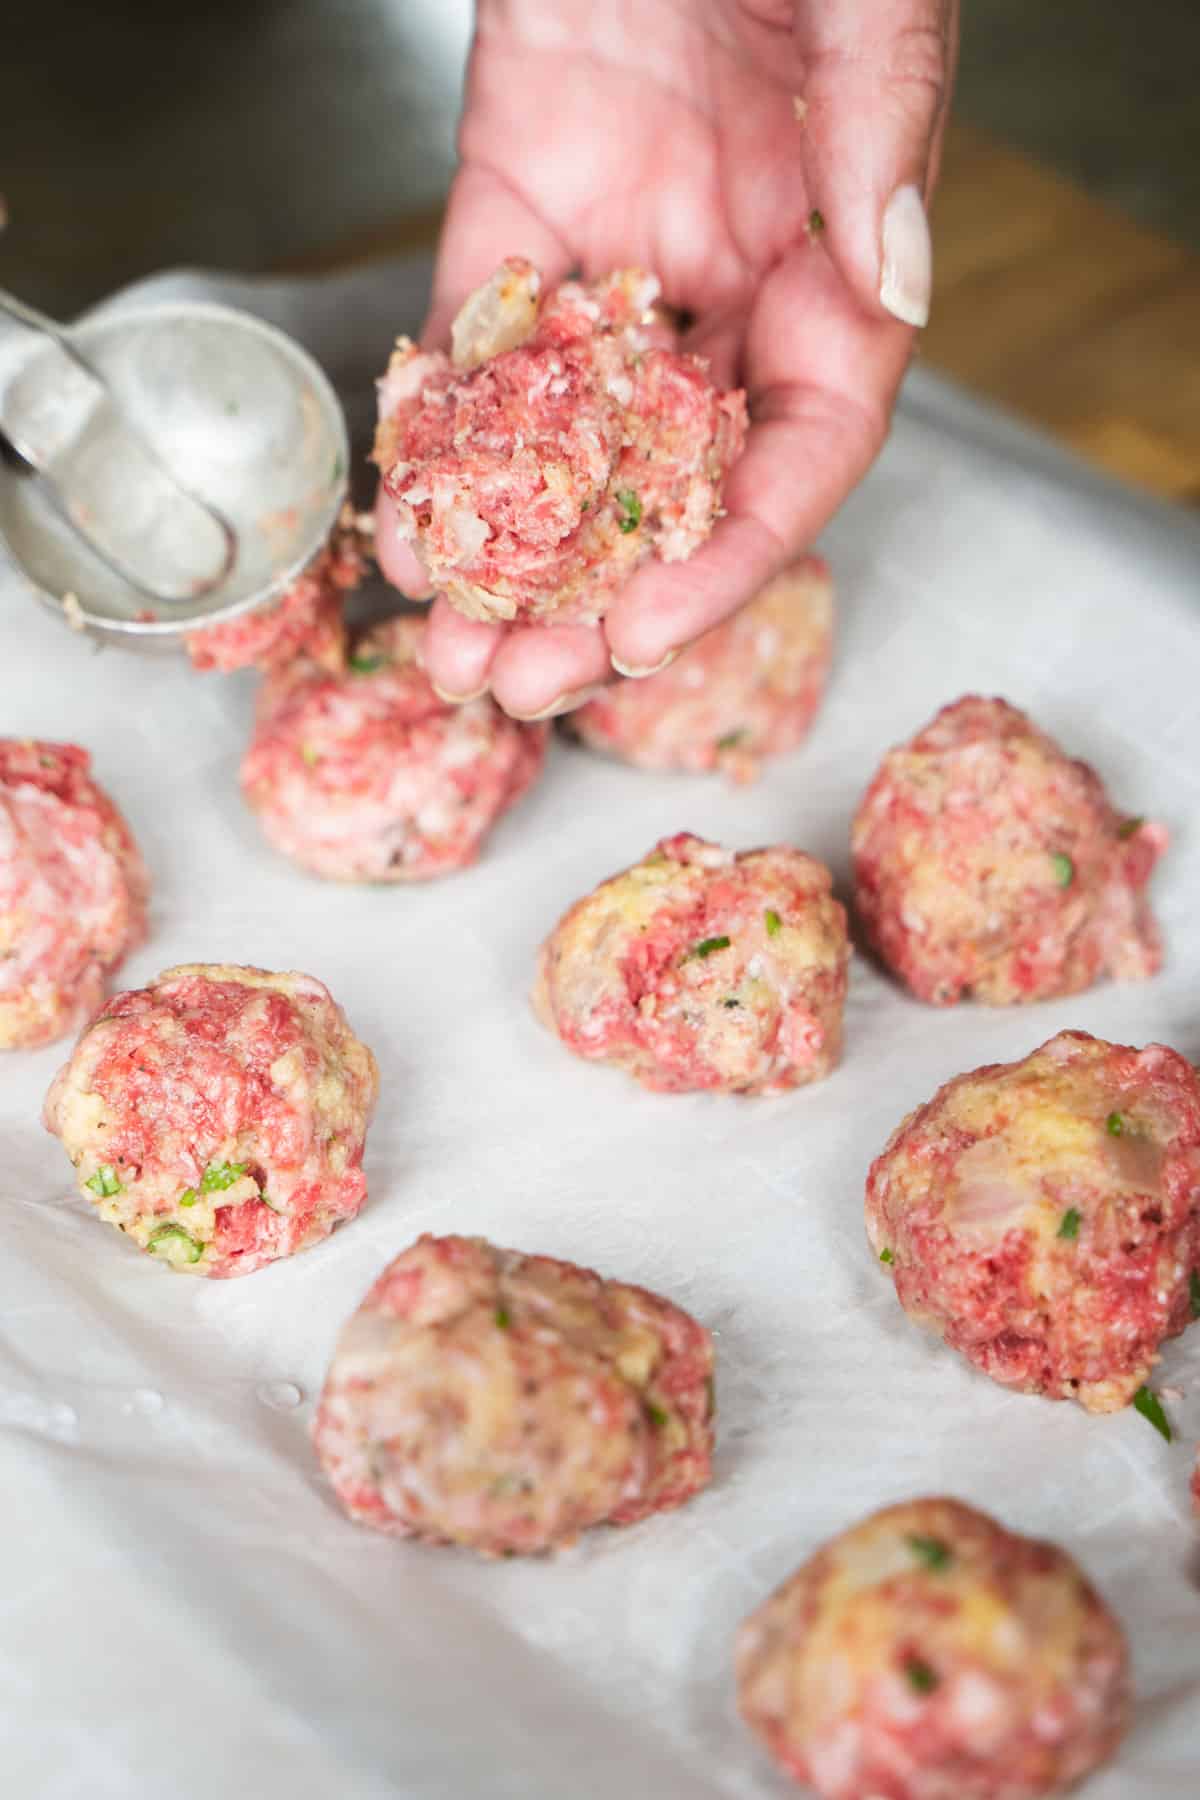 Golf ball sized meatballs on a baking sheet lined with parchment paper.